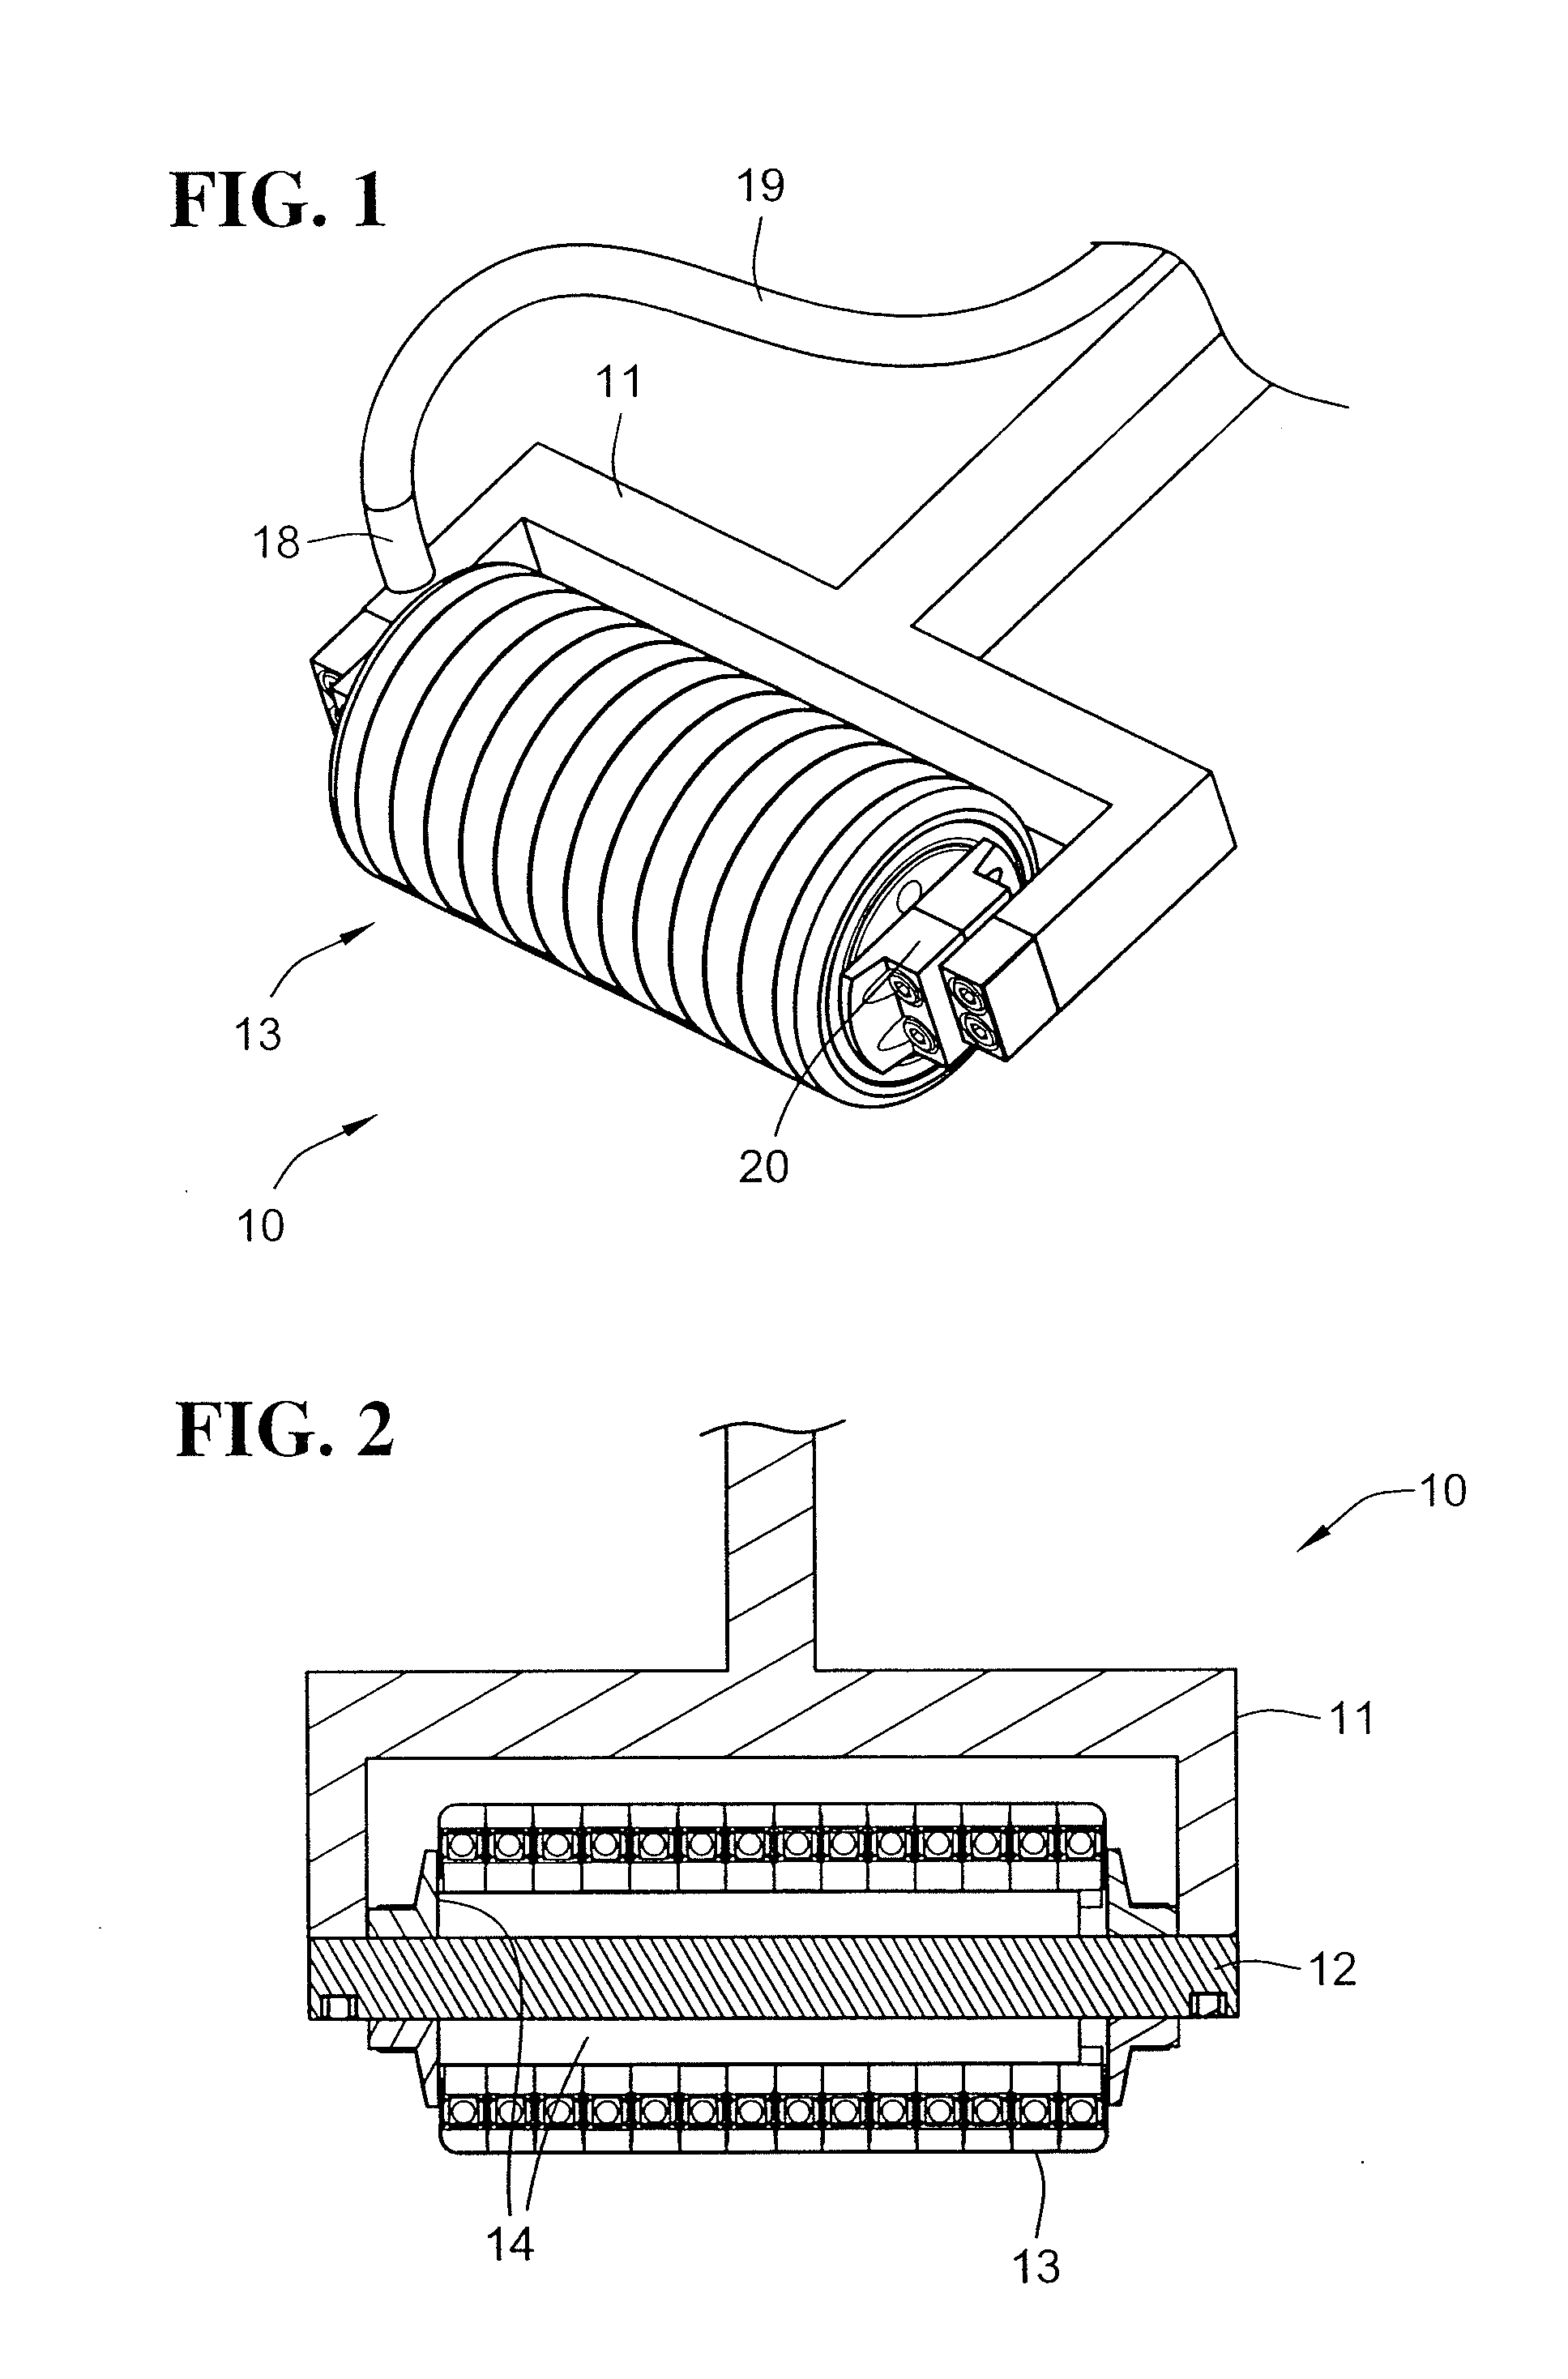 Compaction roller for a fiber placement machine